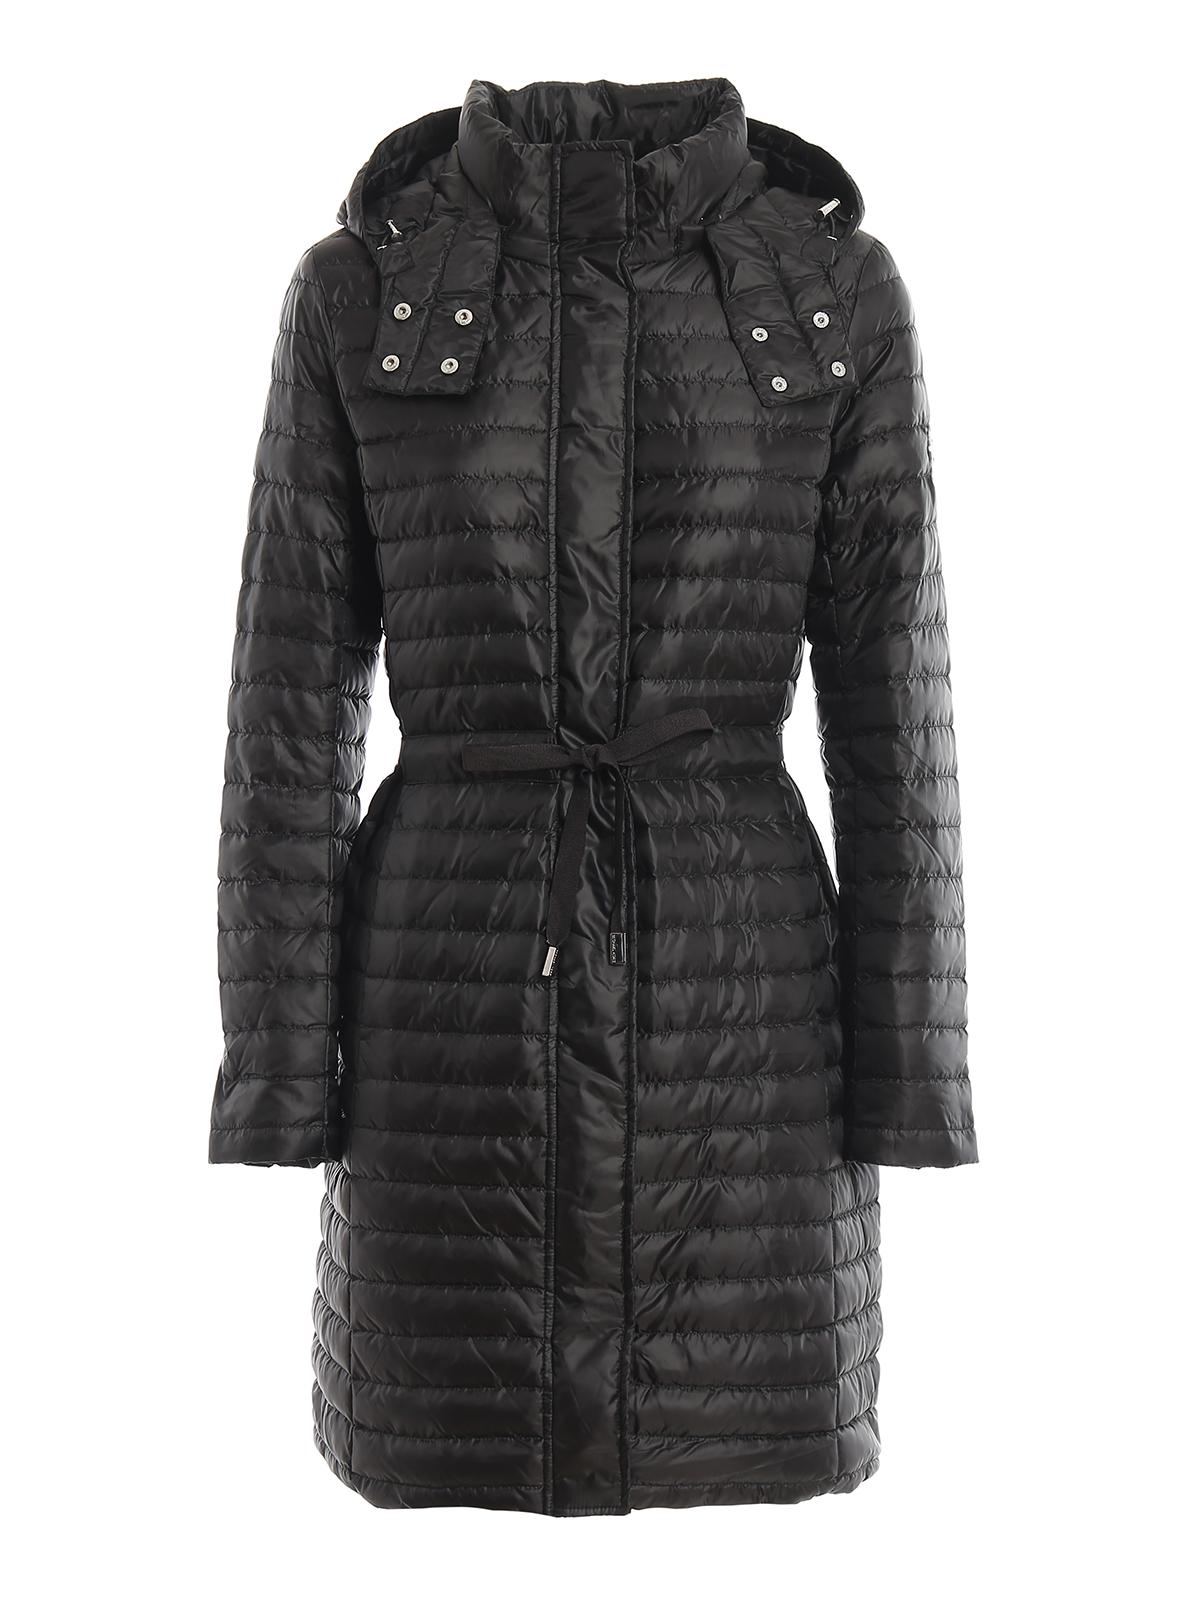 Michael Kors Black Quilted Hooded Padded Coat - Lyst